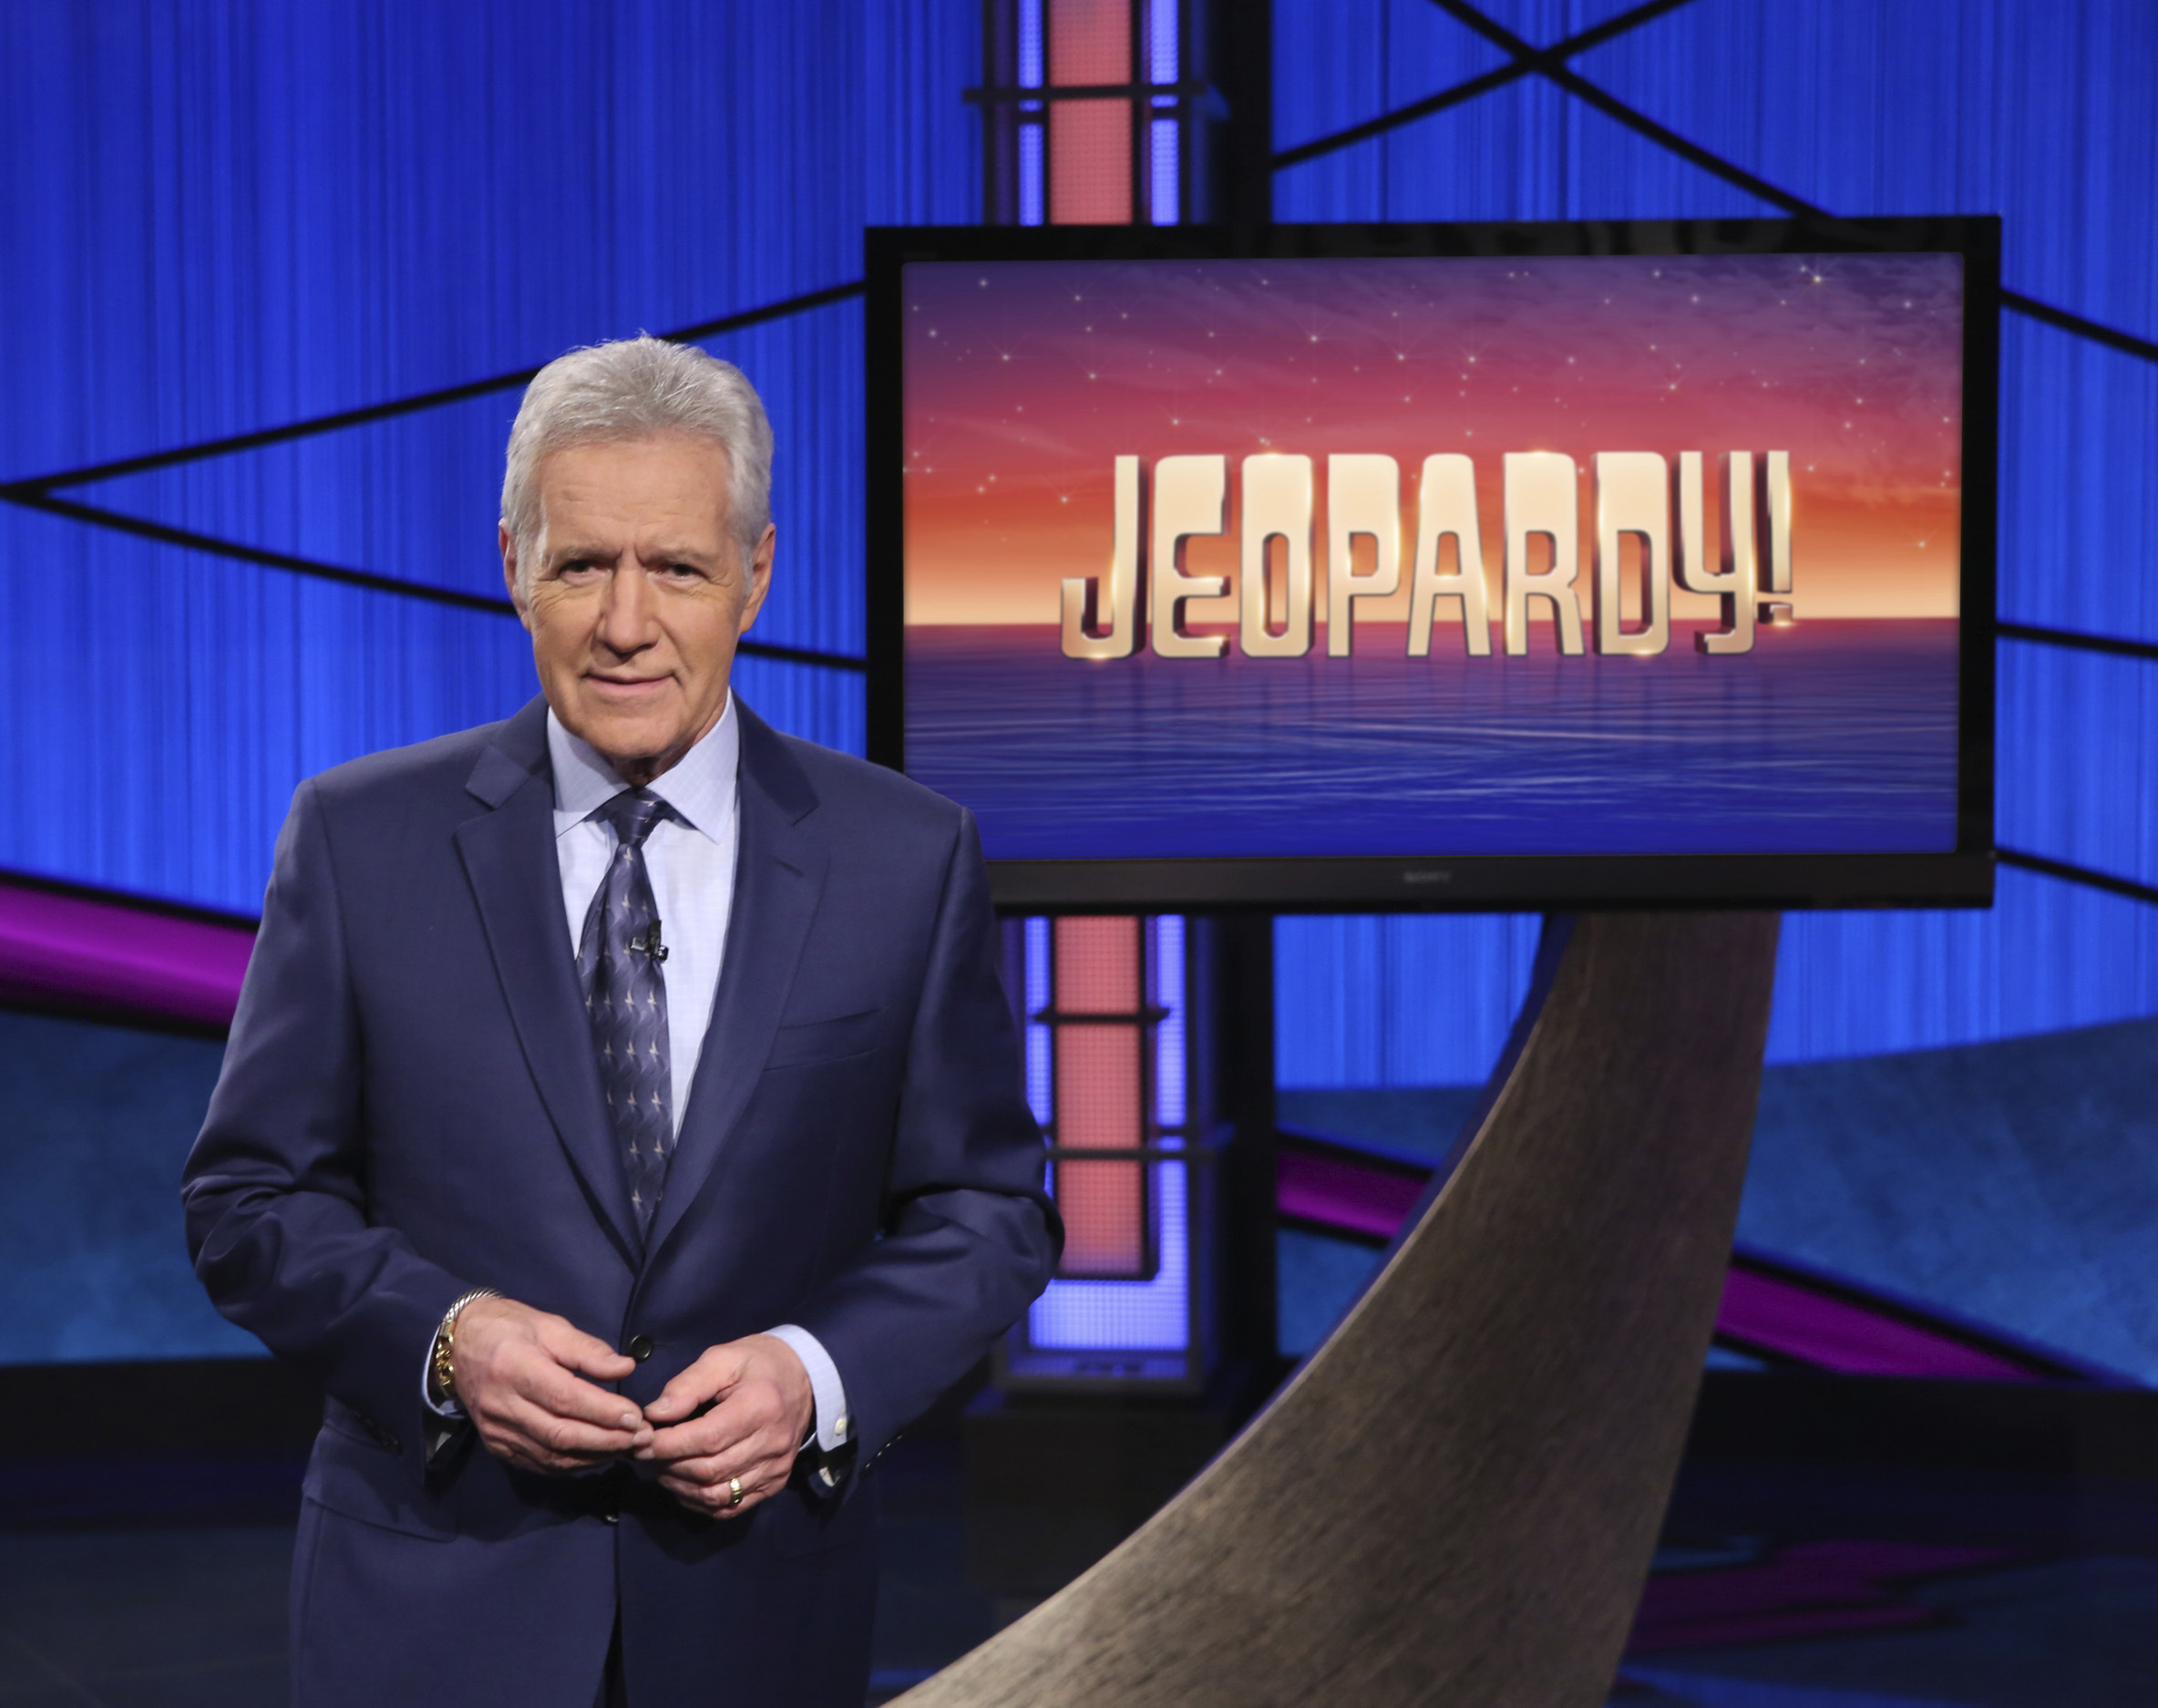 FILE - This image released by Jeopardy! shows Alex Trebek, host of the game show "Jeopardy!" Filling the void left by Trebek after 37 years involves sophisticated research and a parade of guest hosts doing their best to impress viewers and the studio that will make the call. (Jeopardy! via AP)